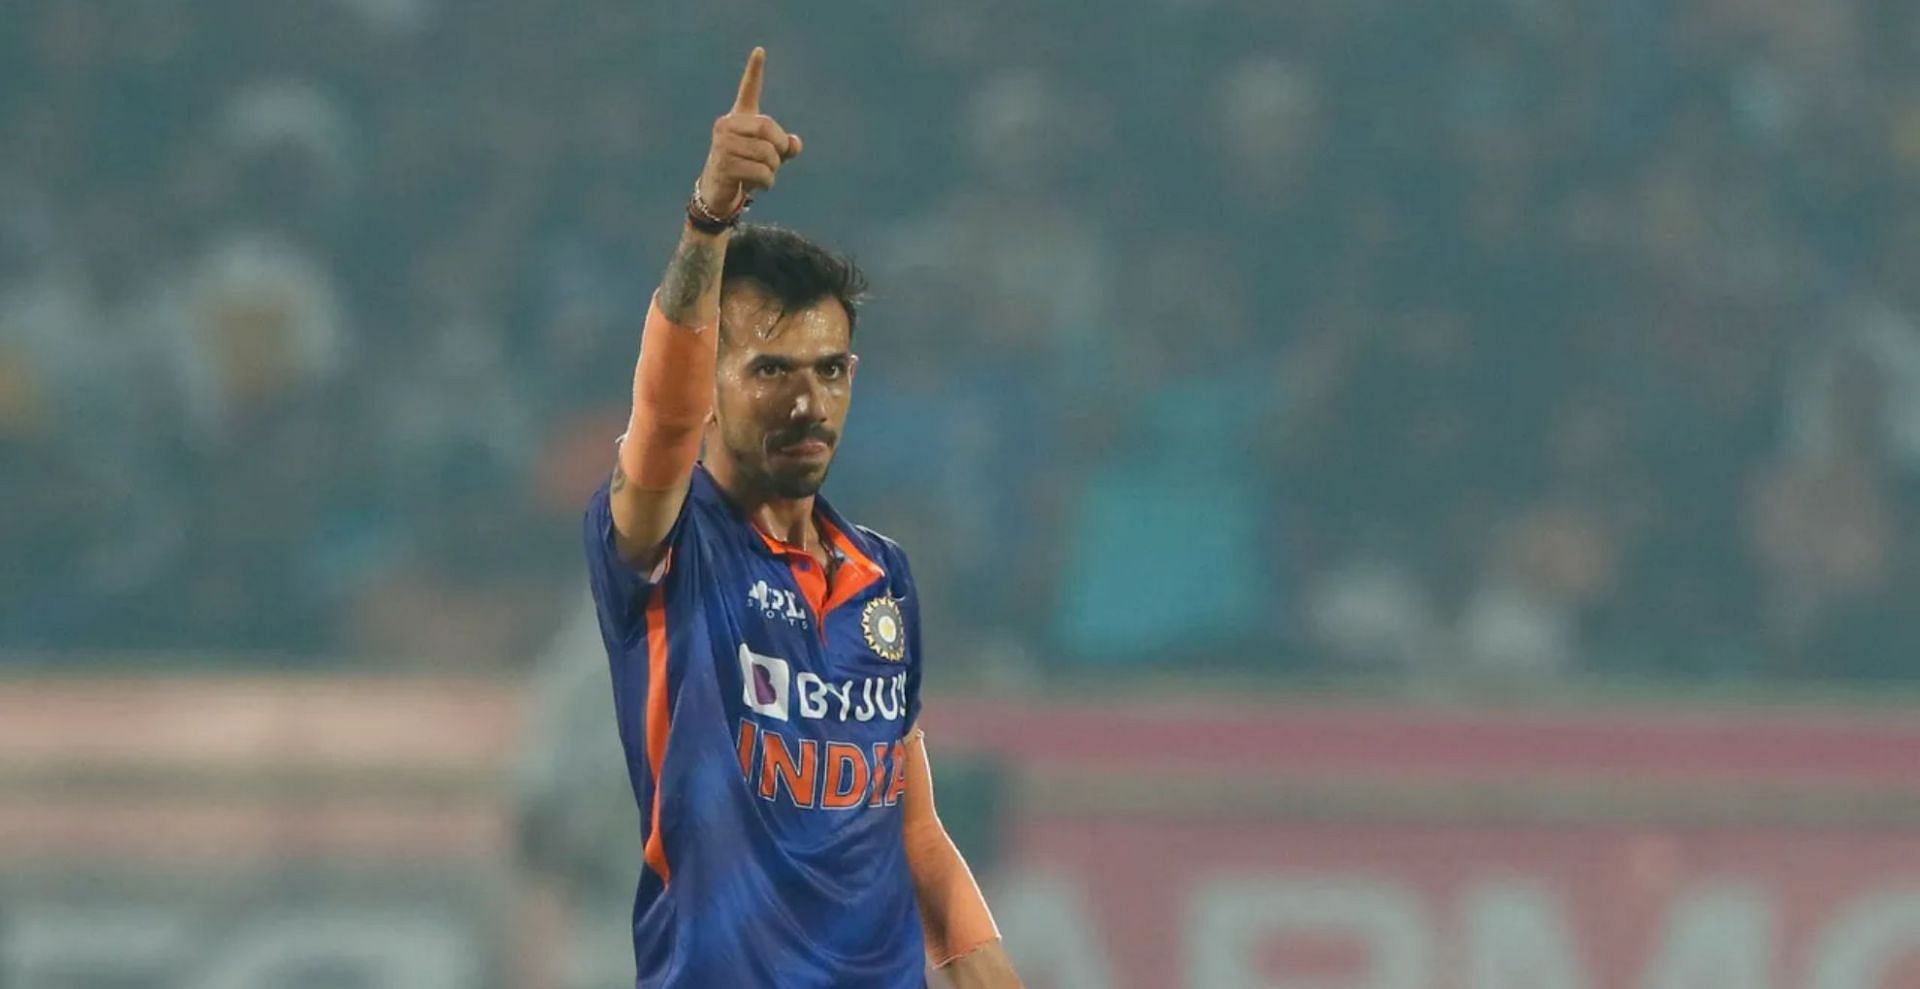 Yuzvendra Chahal was awarded Player of the Match in the 3rd T20I (Credit: BCCI).